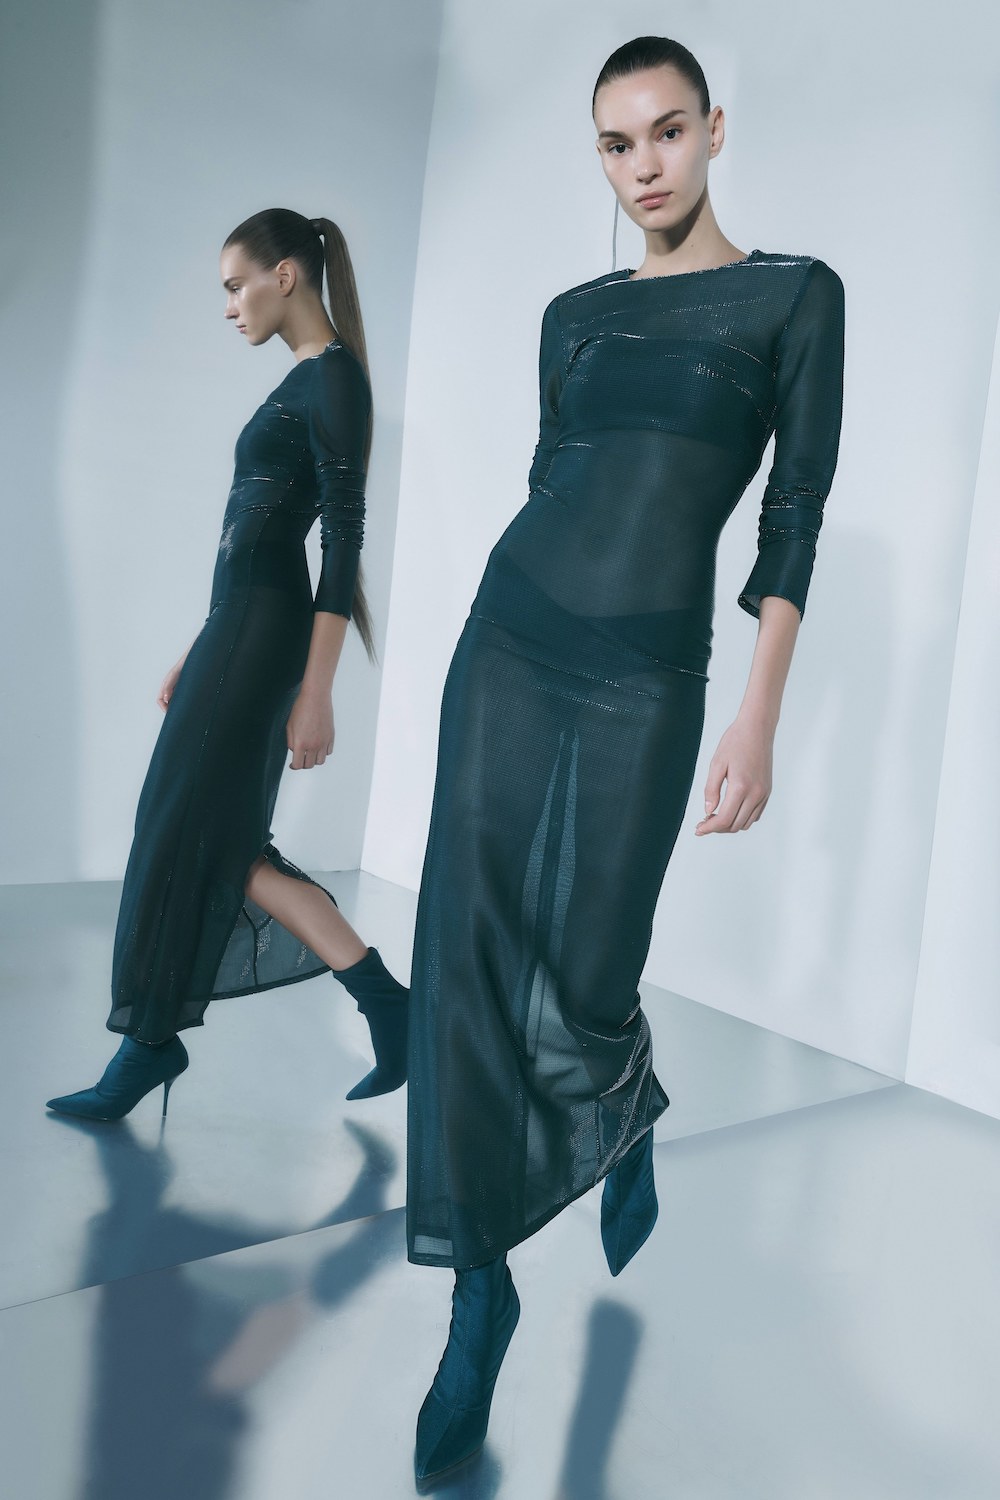 Best of the Resort 2020 Collections - theFashionSpot